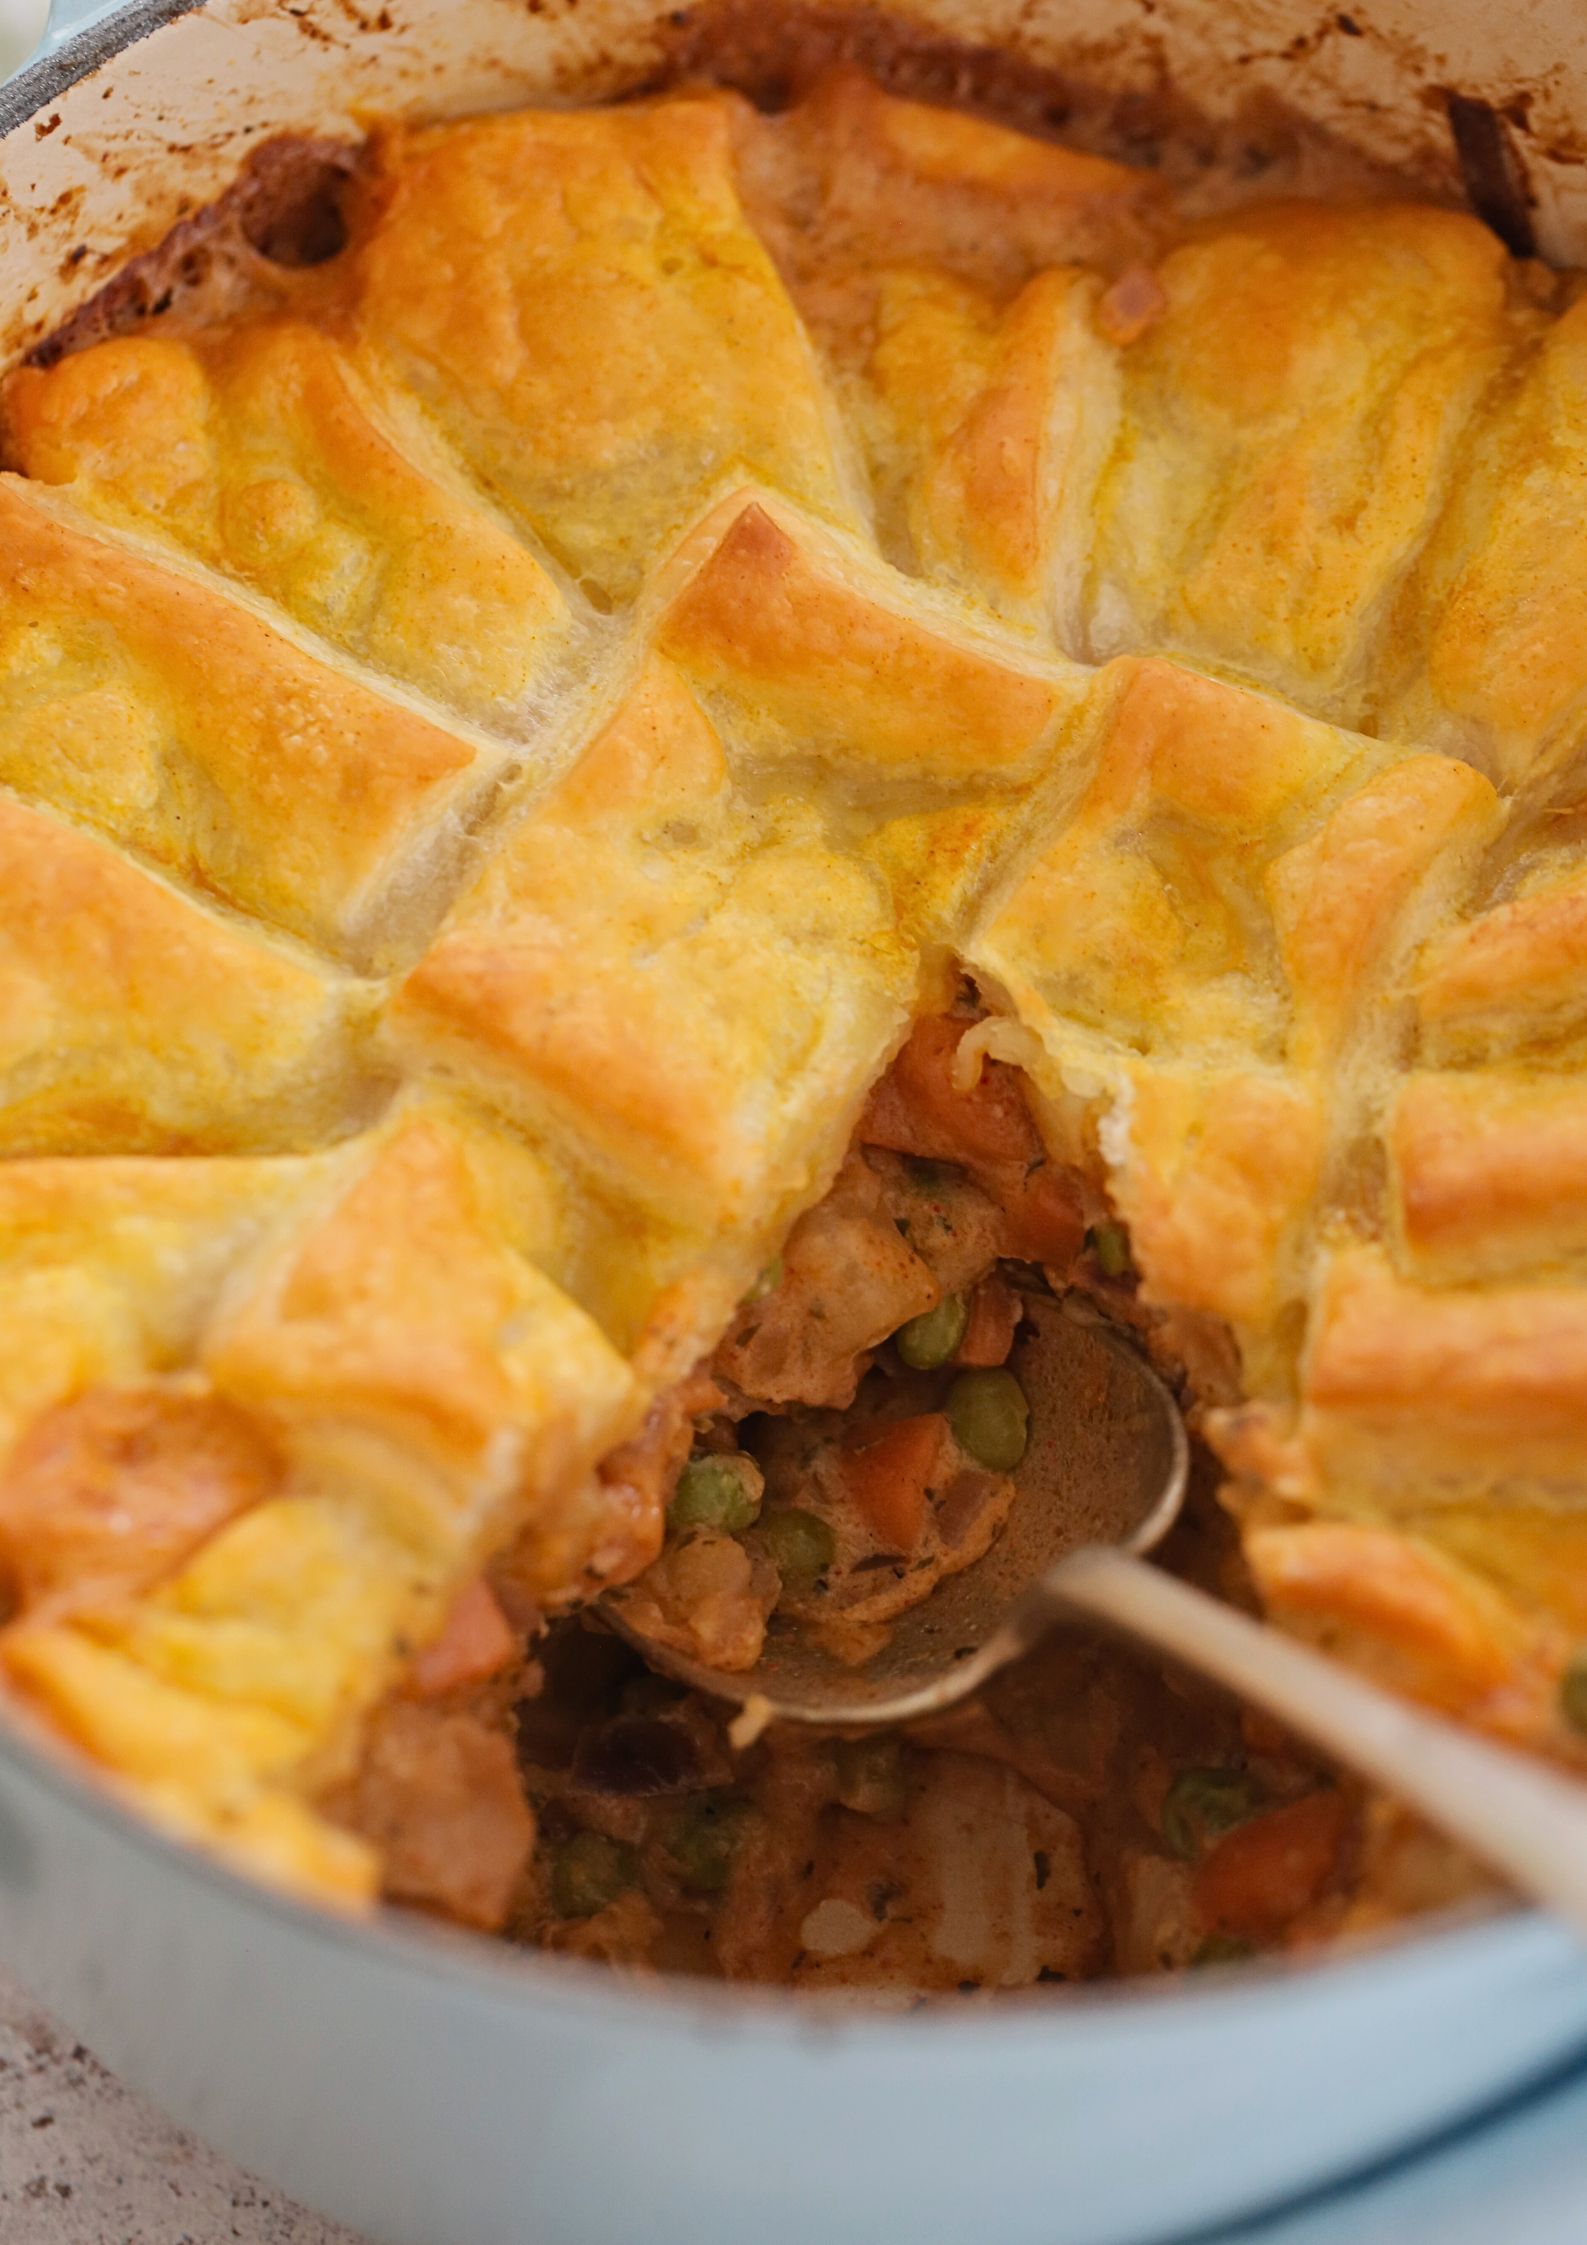 A comfort food classic made vegan! This chicken pot pie packed with veggies and topped with flaky pastry is an easy one pan meal that's absolutely full of flavour. It's also perfect for making ahead and a real family favourite! Recipe on thecookandhim.com | #veganpotpie #meatfree #veganchicken #easyveganmeal #onepanmeal #vegandinner